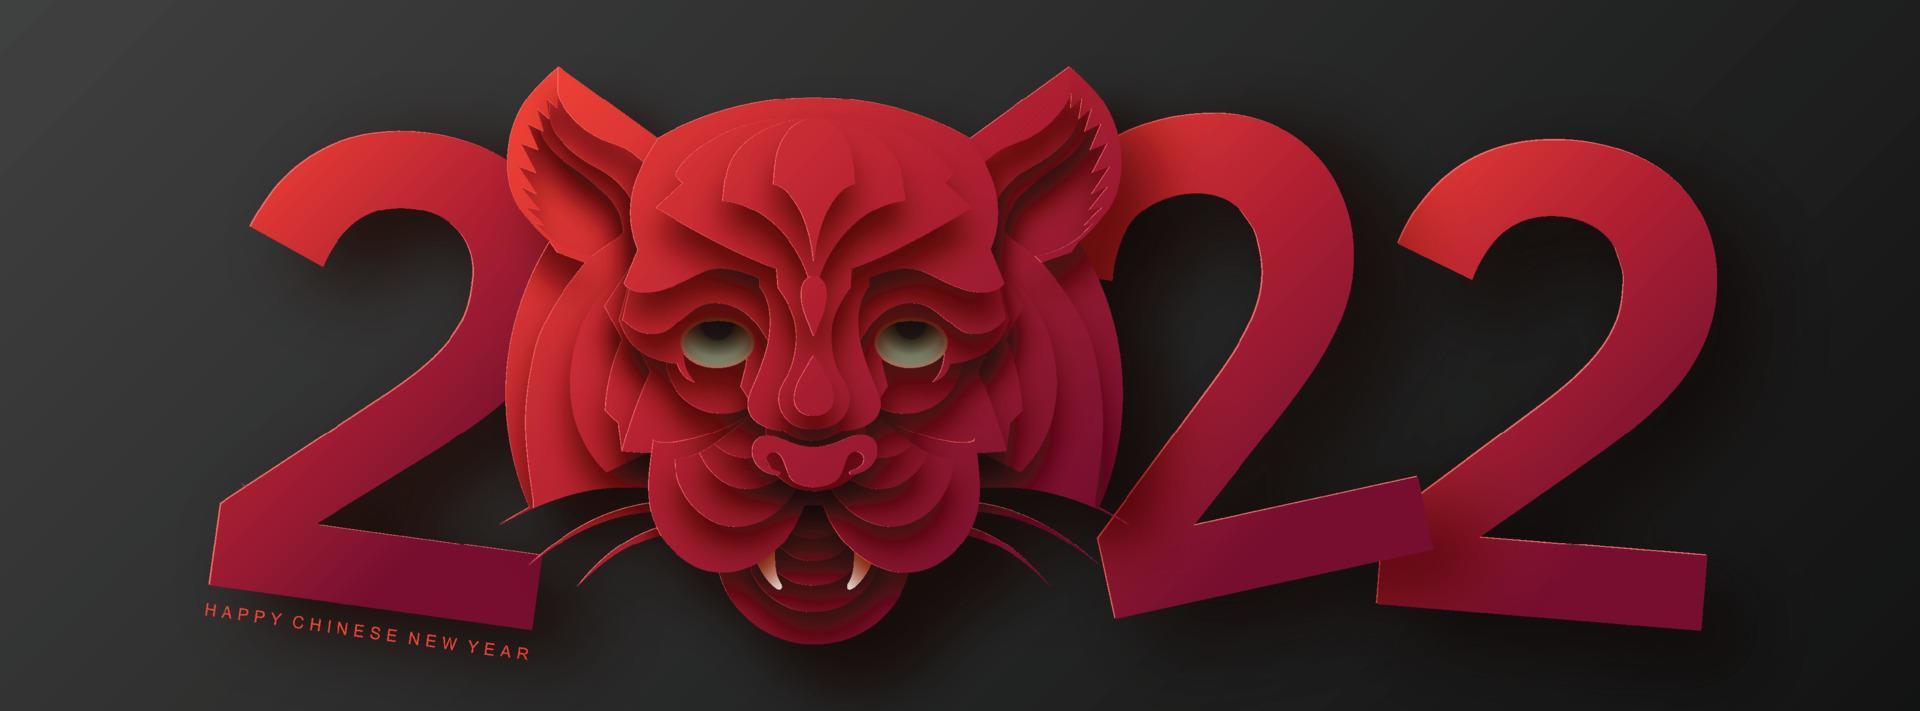 Chinese new year 2022 year of the tiger red and gold flower and asian elements paper cut with craft style on background. vector